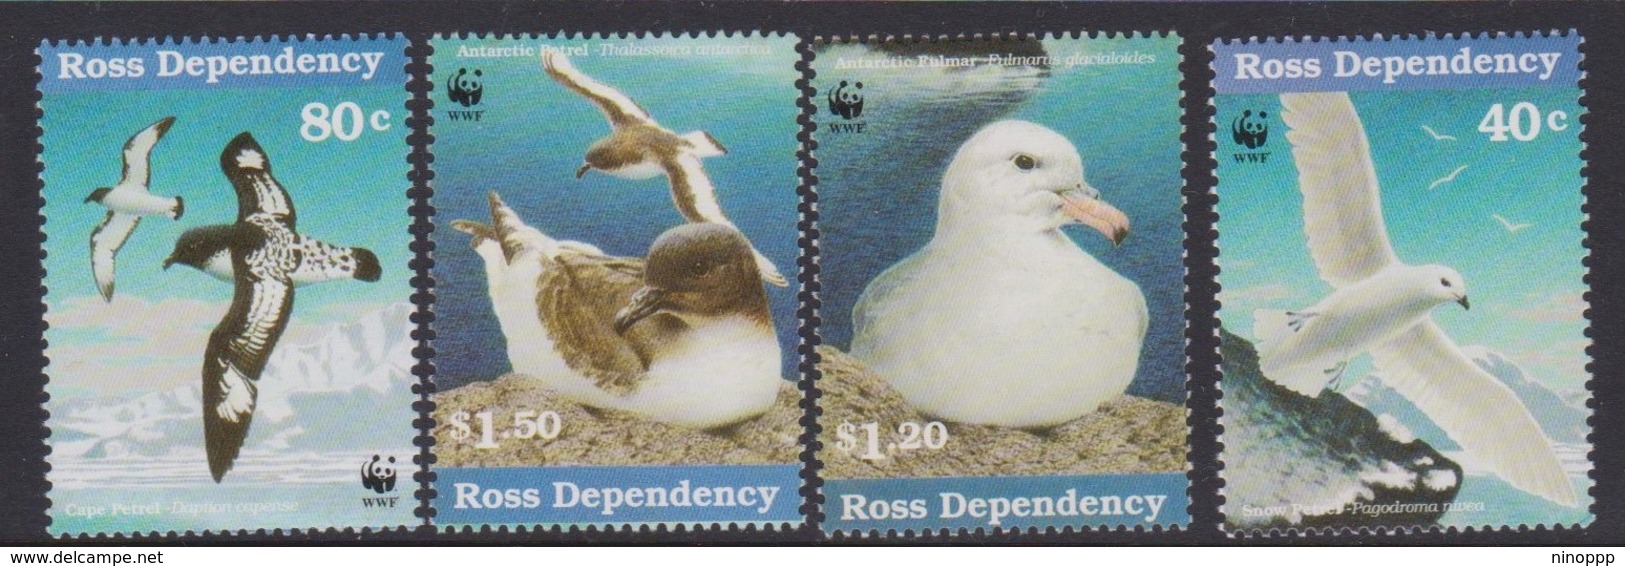 New Zealand-Ross Dependency  SG 44-47 1997 WWF Birds, Mint Never Hinged - Nuevos